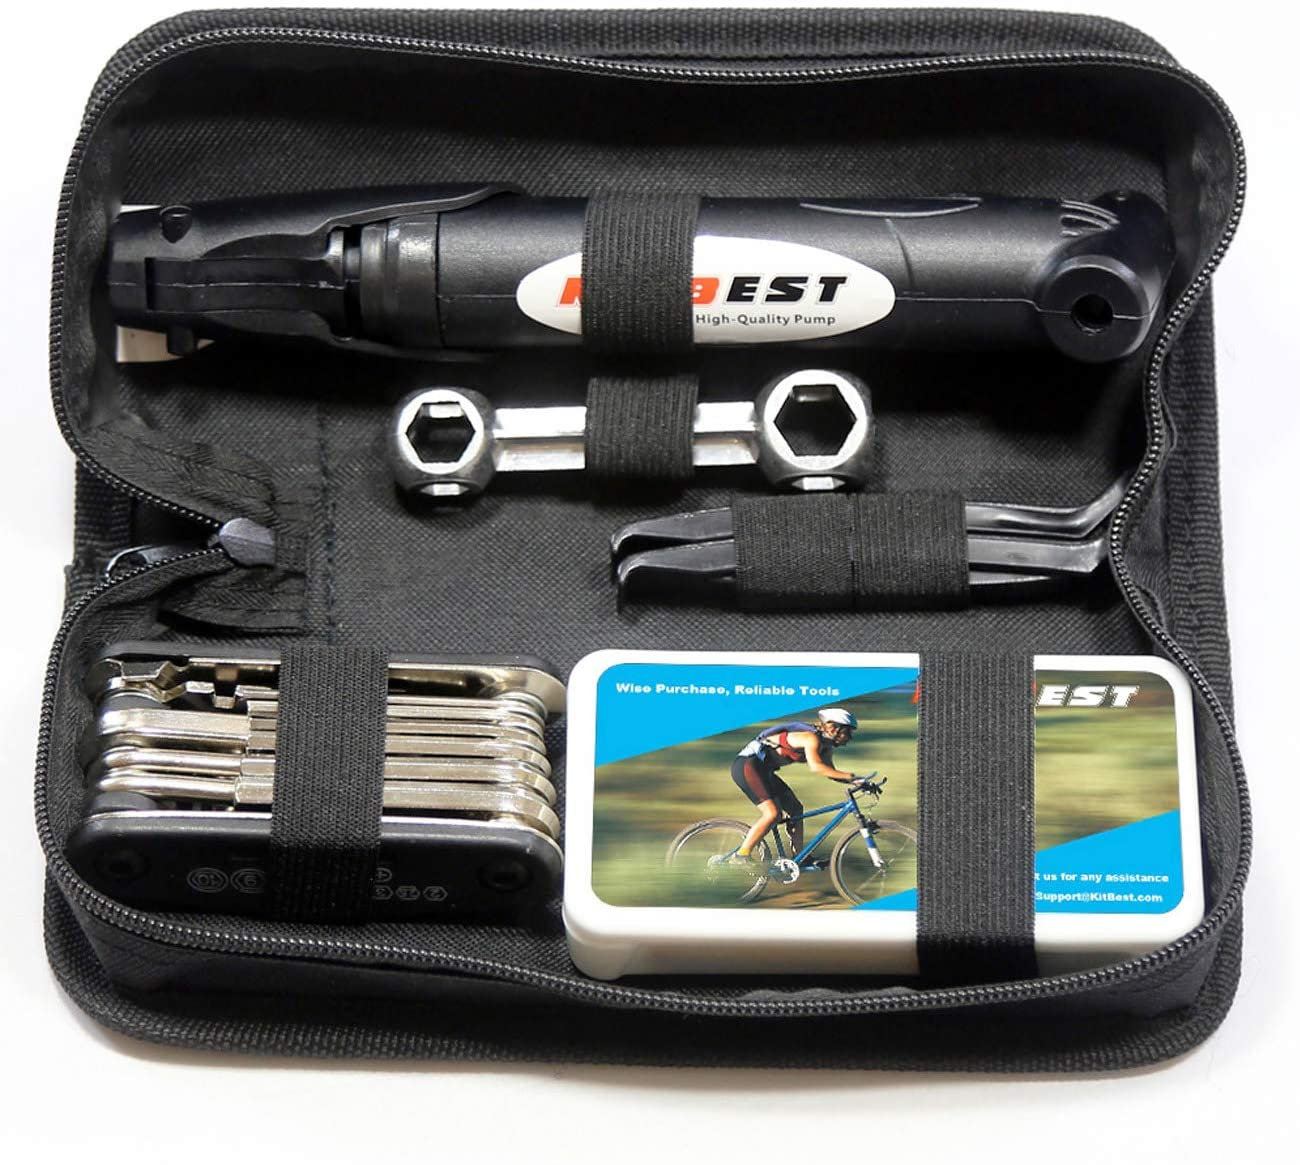 A portable mountain bike repair kit should have all the essential tools for doing basic repairs to your bike.